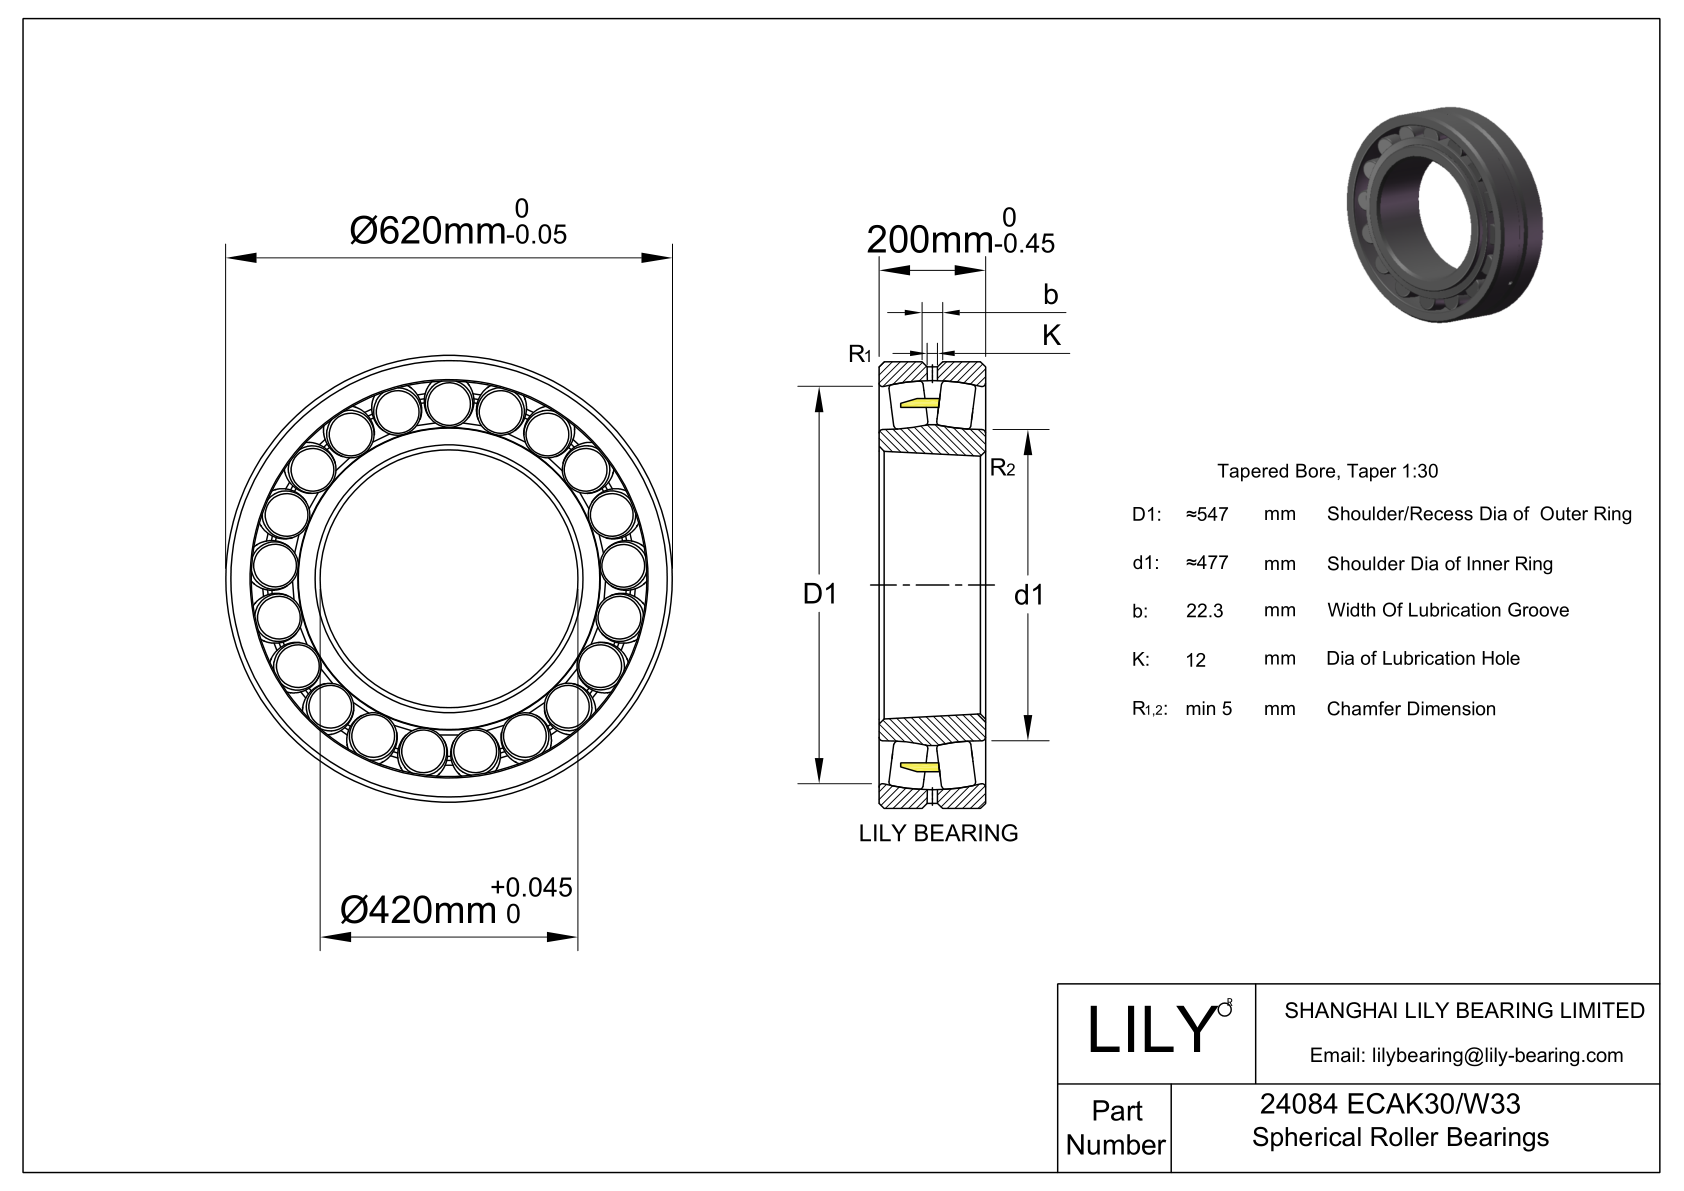 24084 ECAK30/W33 Double Row Spherical Roller Bearing cad drawing